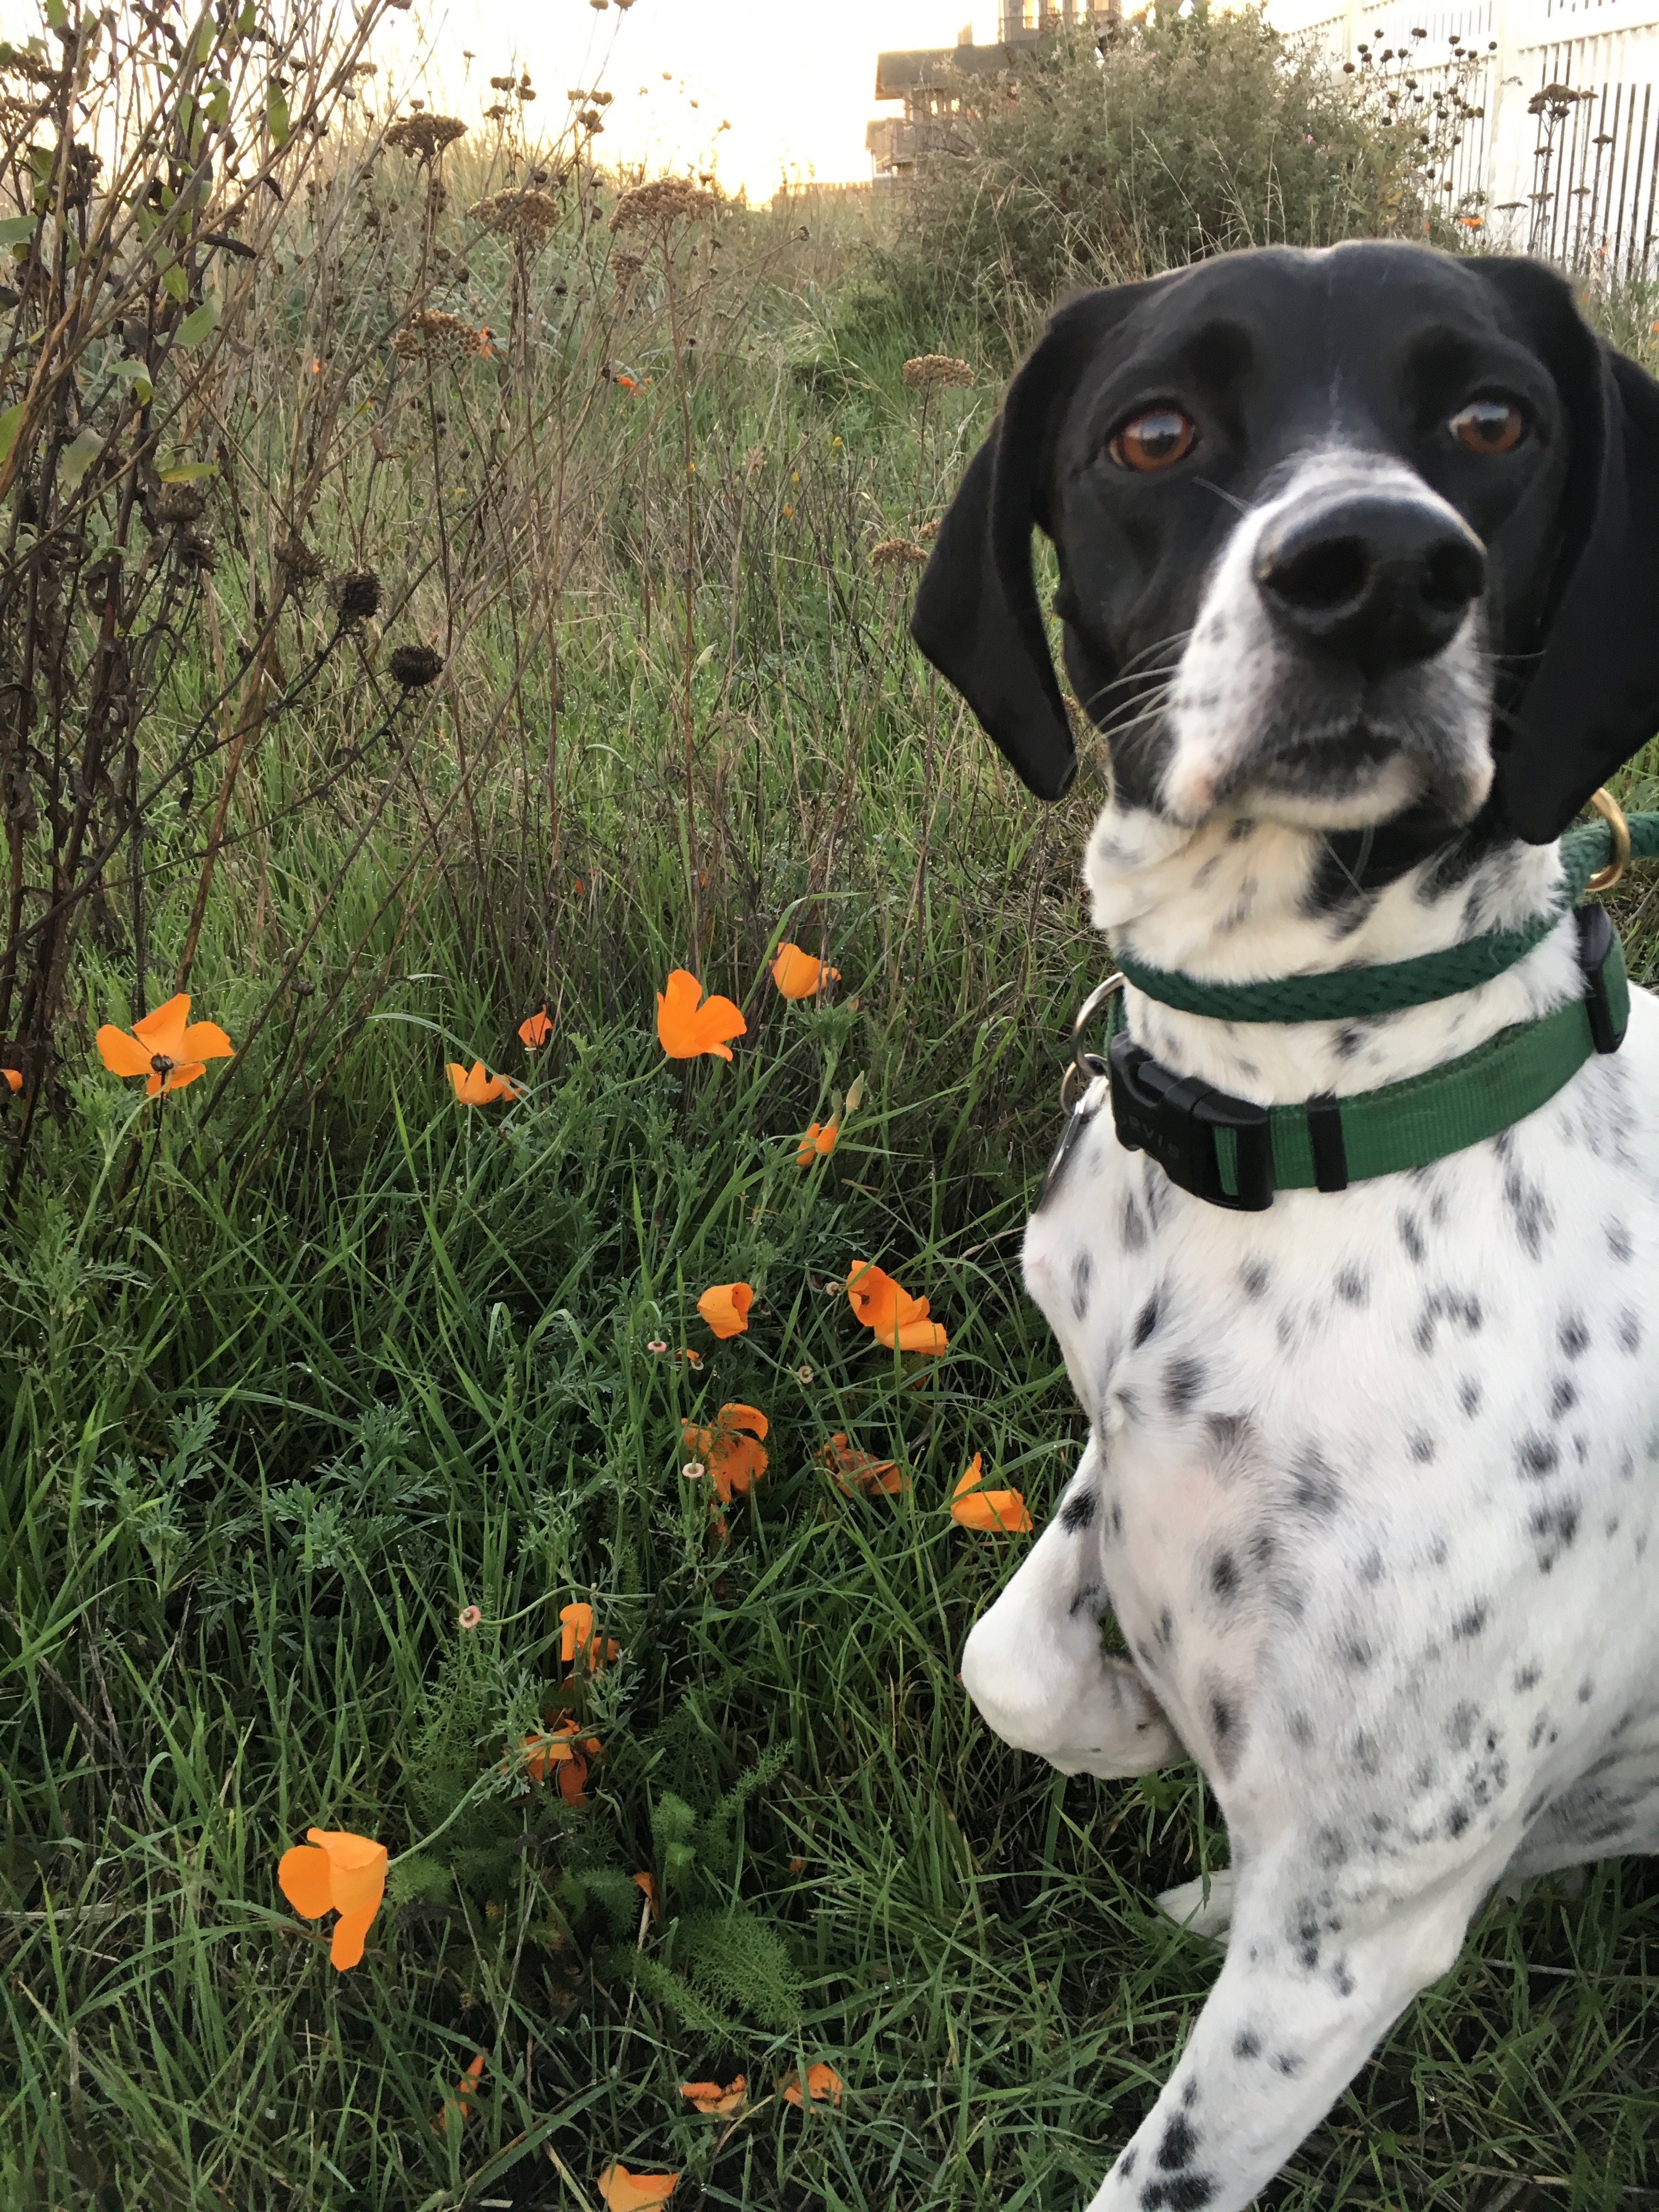 My dog Stormy in a field of flowers